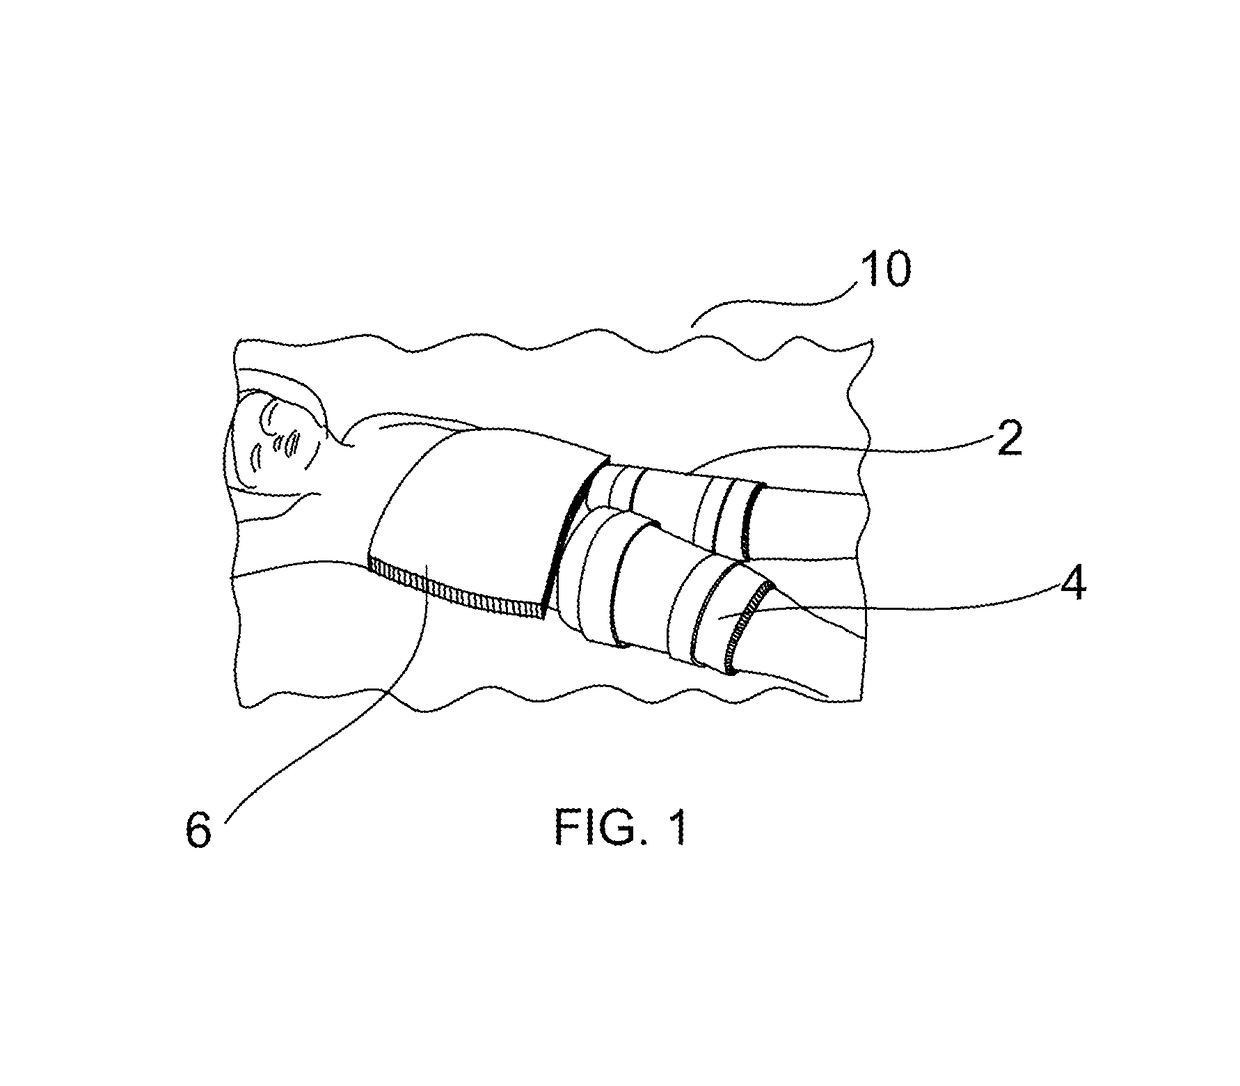 Non-invasive thermal wrap method for inducing calorie burning and weight loss